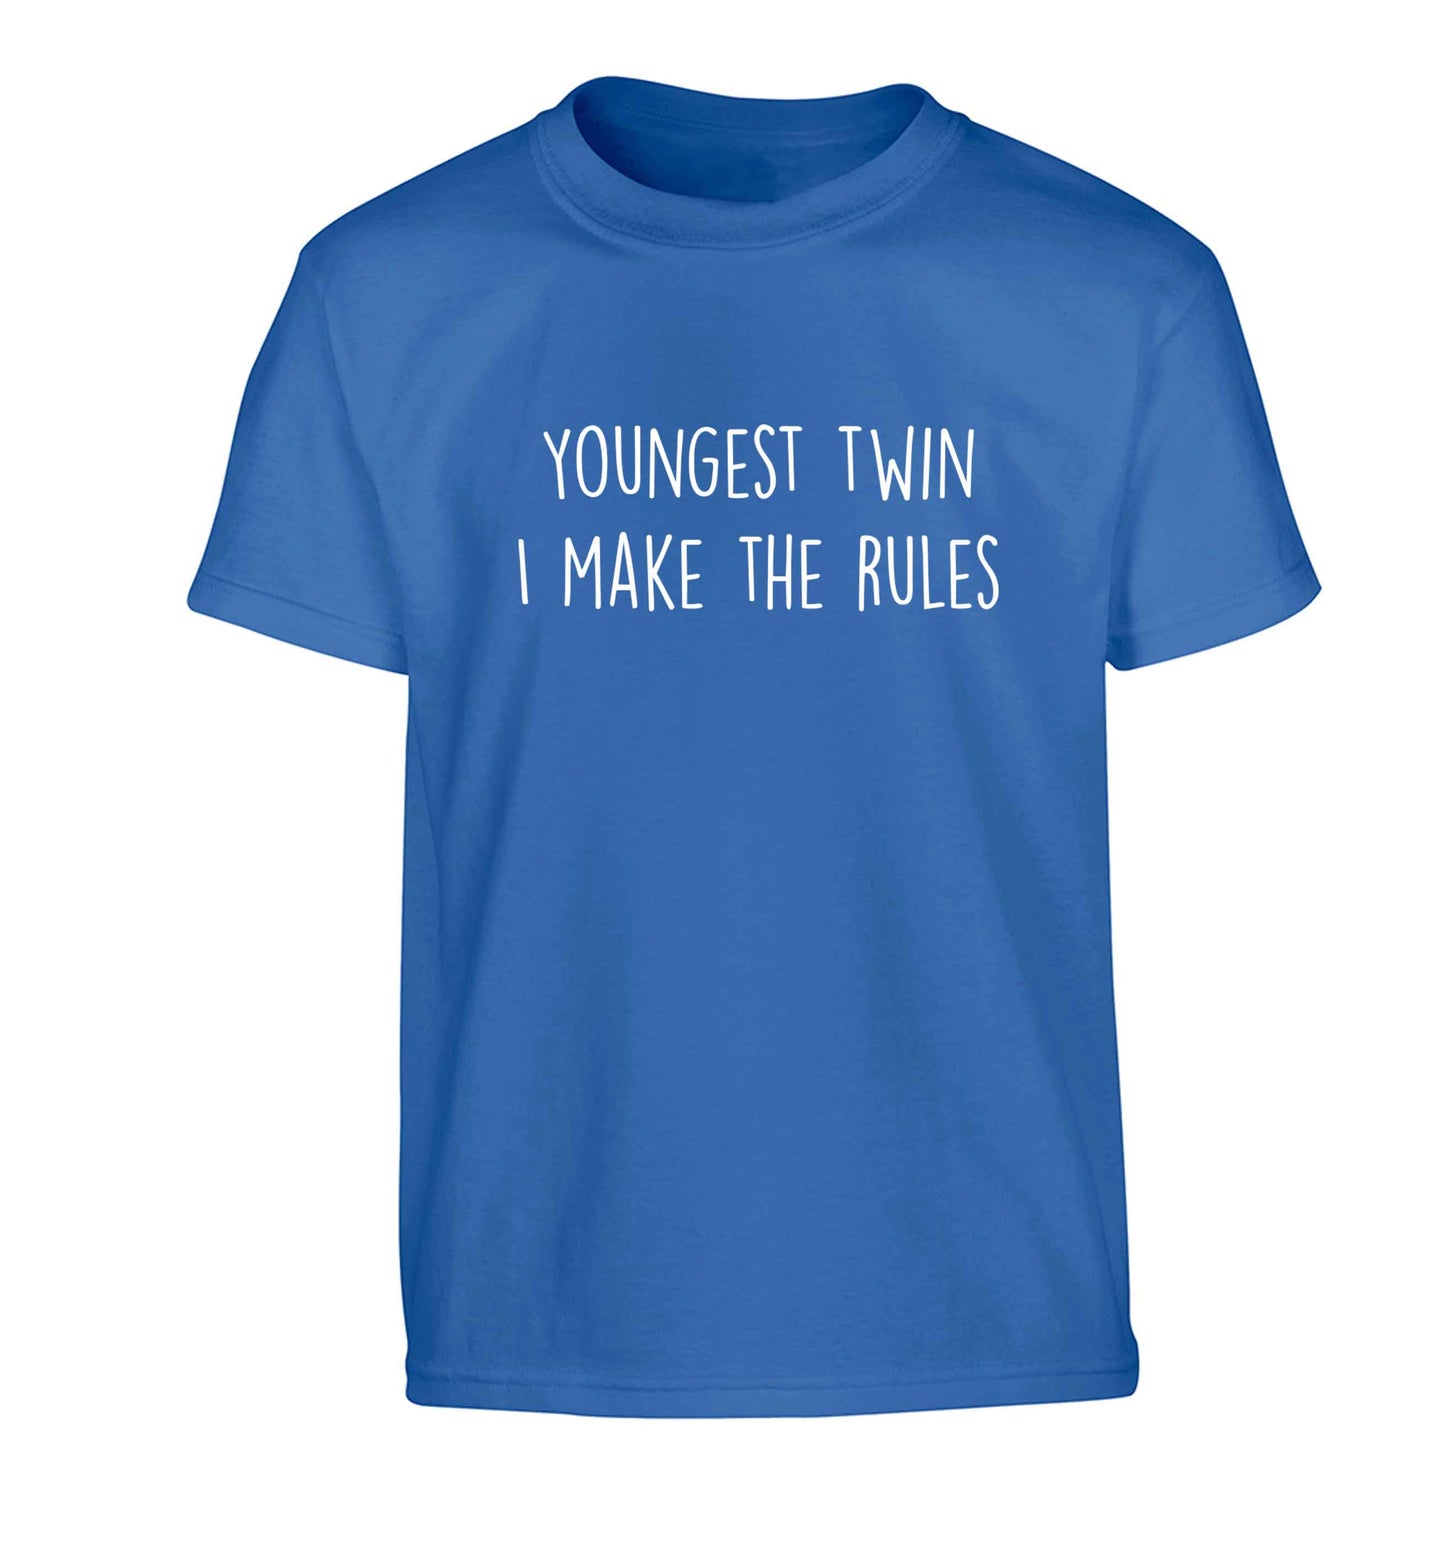 Youngest twin I make the rules Children's blue Tshirt 12-13 Years